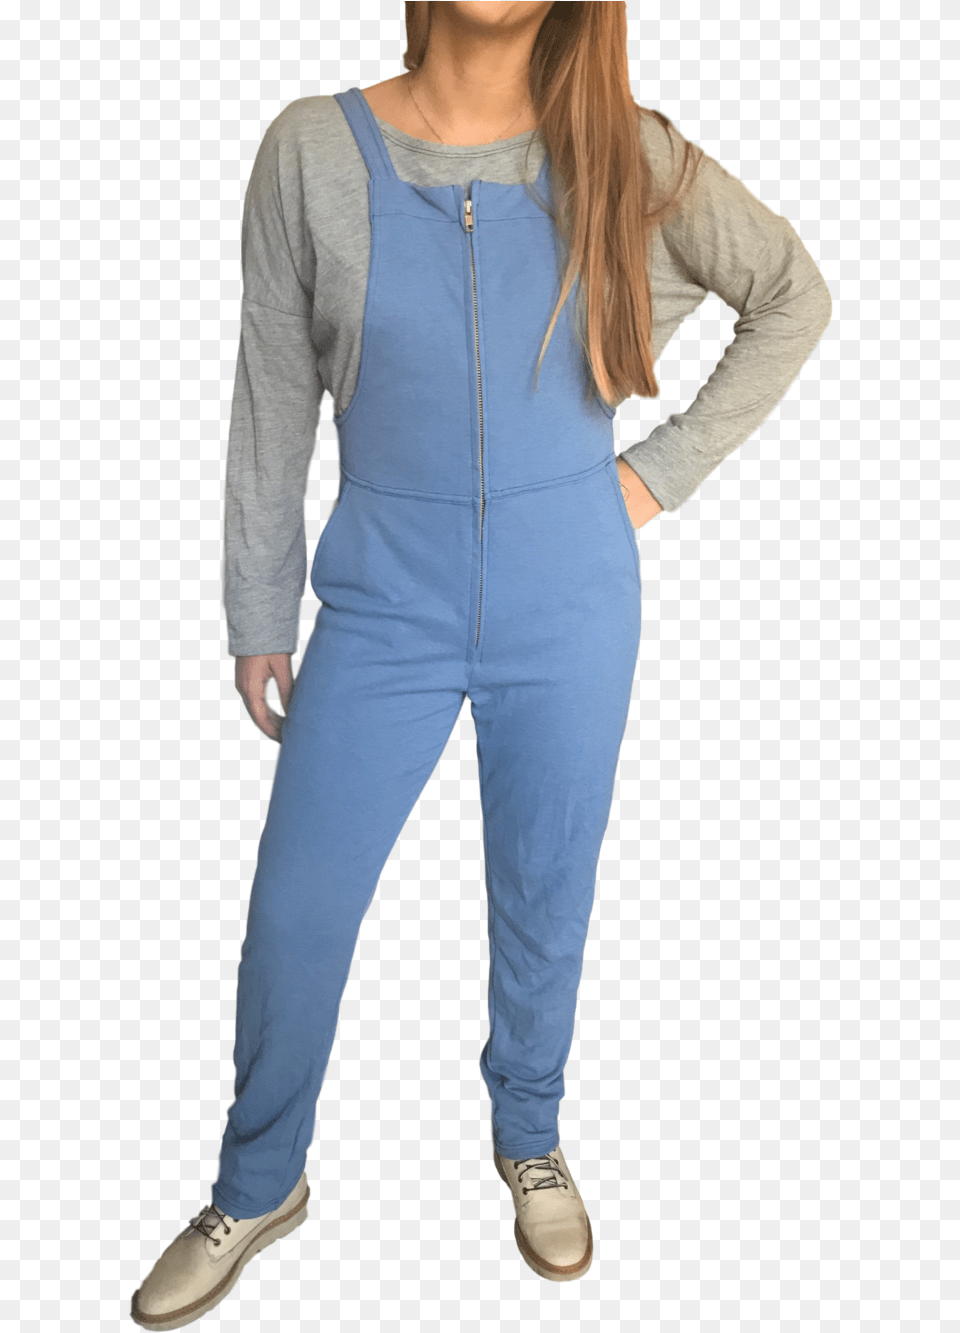 The Knit Bib Overalls Girl, Clothing, Long Sleeve, Pants, Sleeve Free Transparent Png